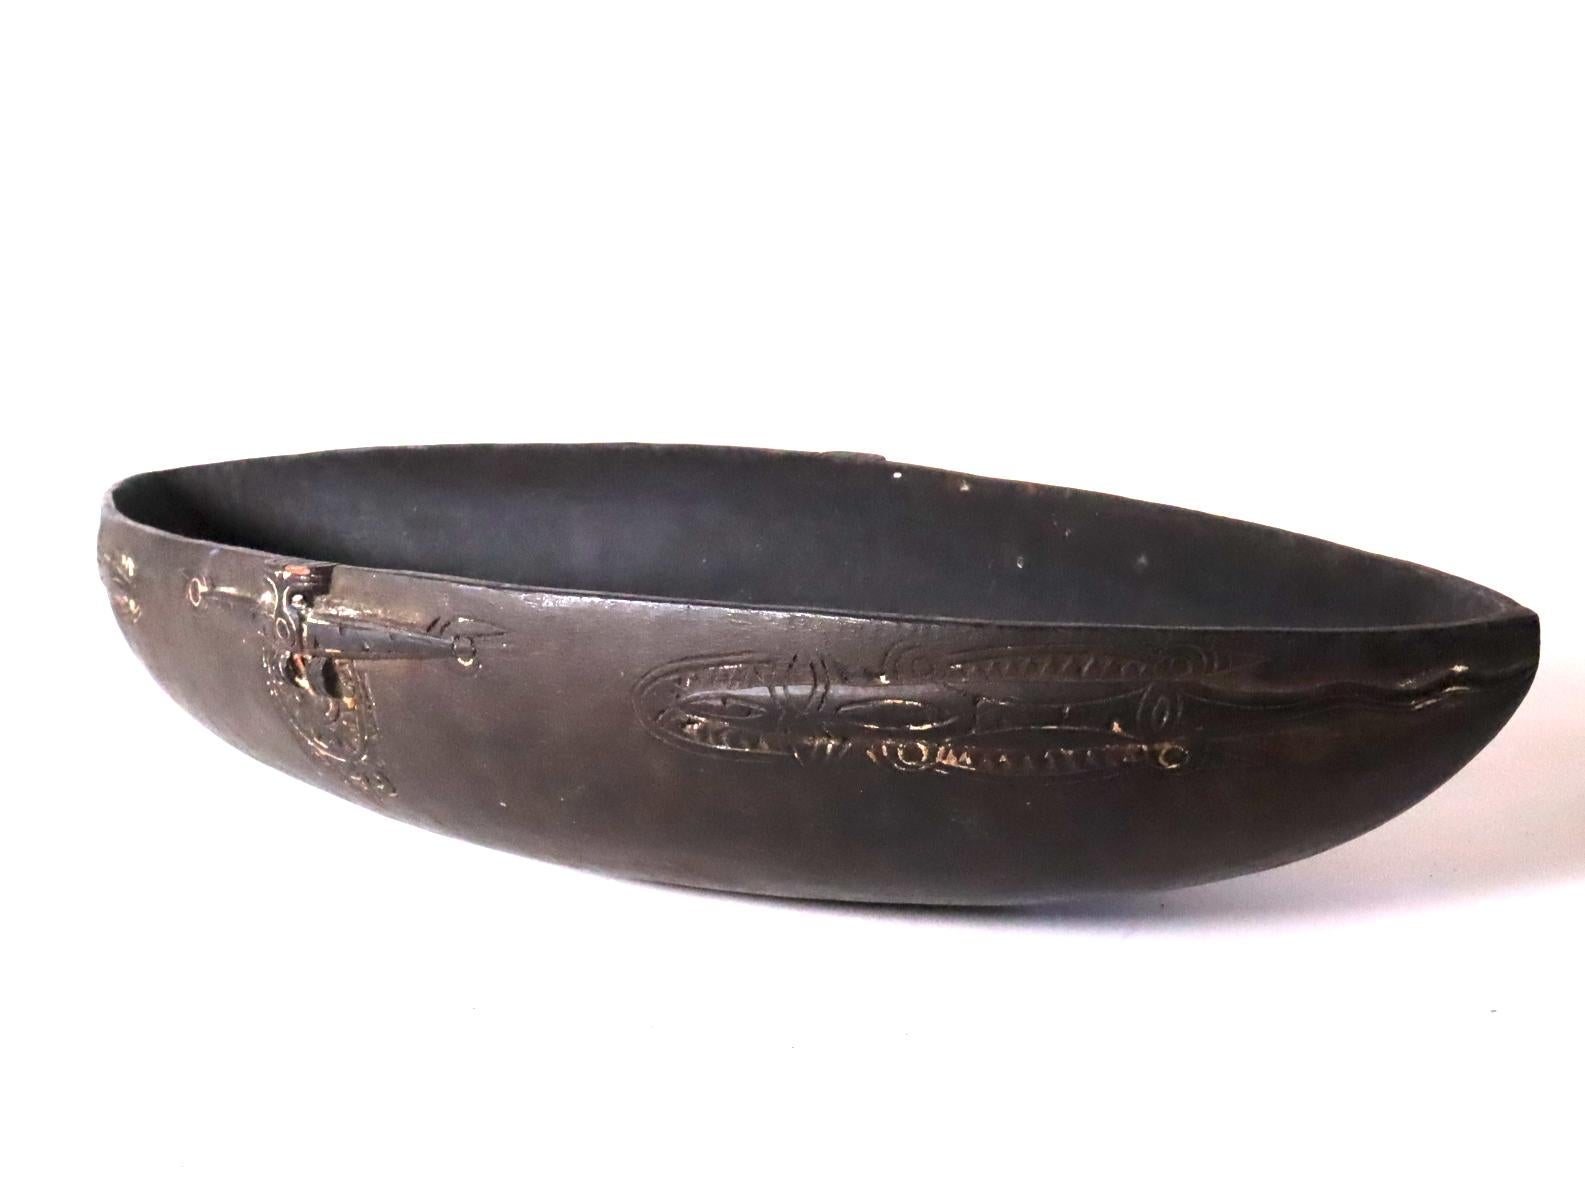 Store closing March 31. Last chance clearance sale.  Feast bowl, carved wood with black patina and remains of white lime in the incised areas. From the Massim region off the East Coast of Papua New Guinea. Probably created in the early to mid-20th